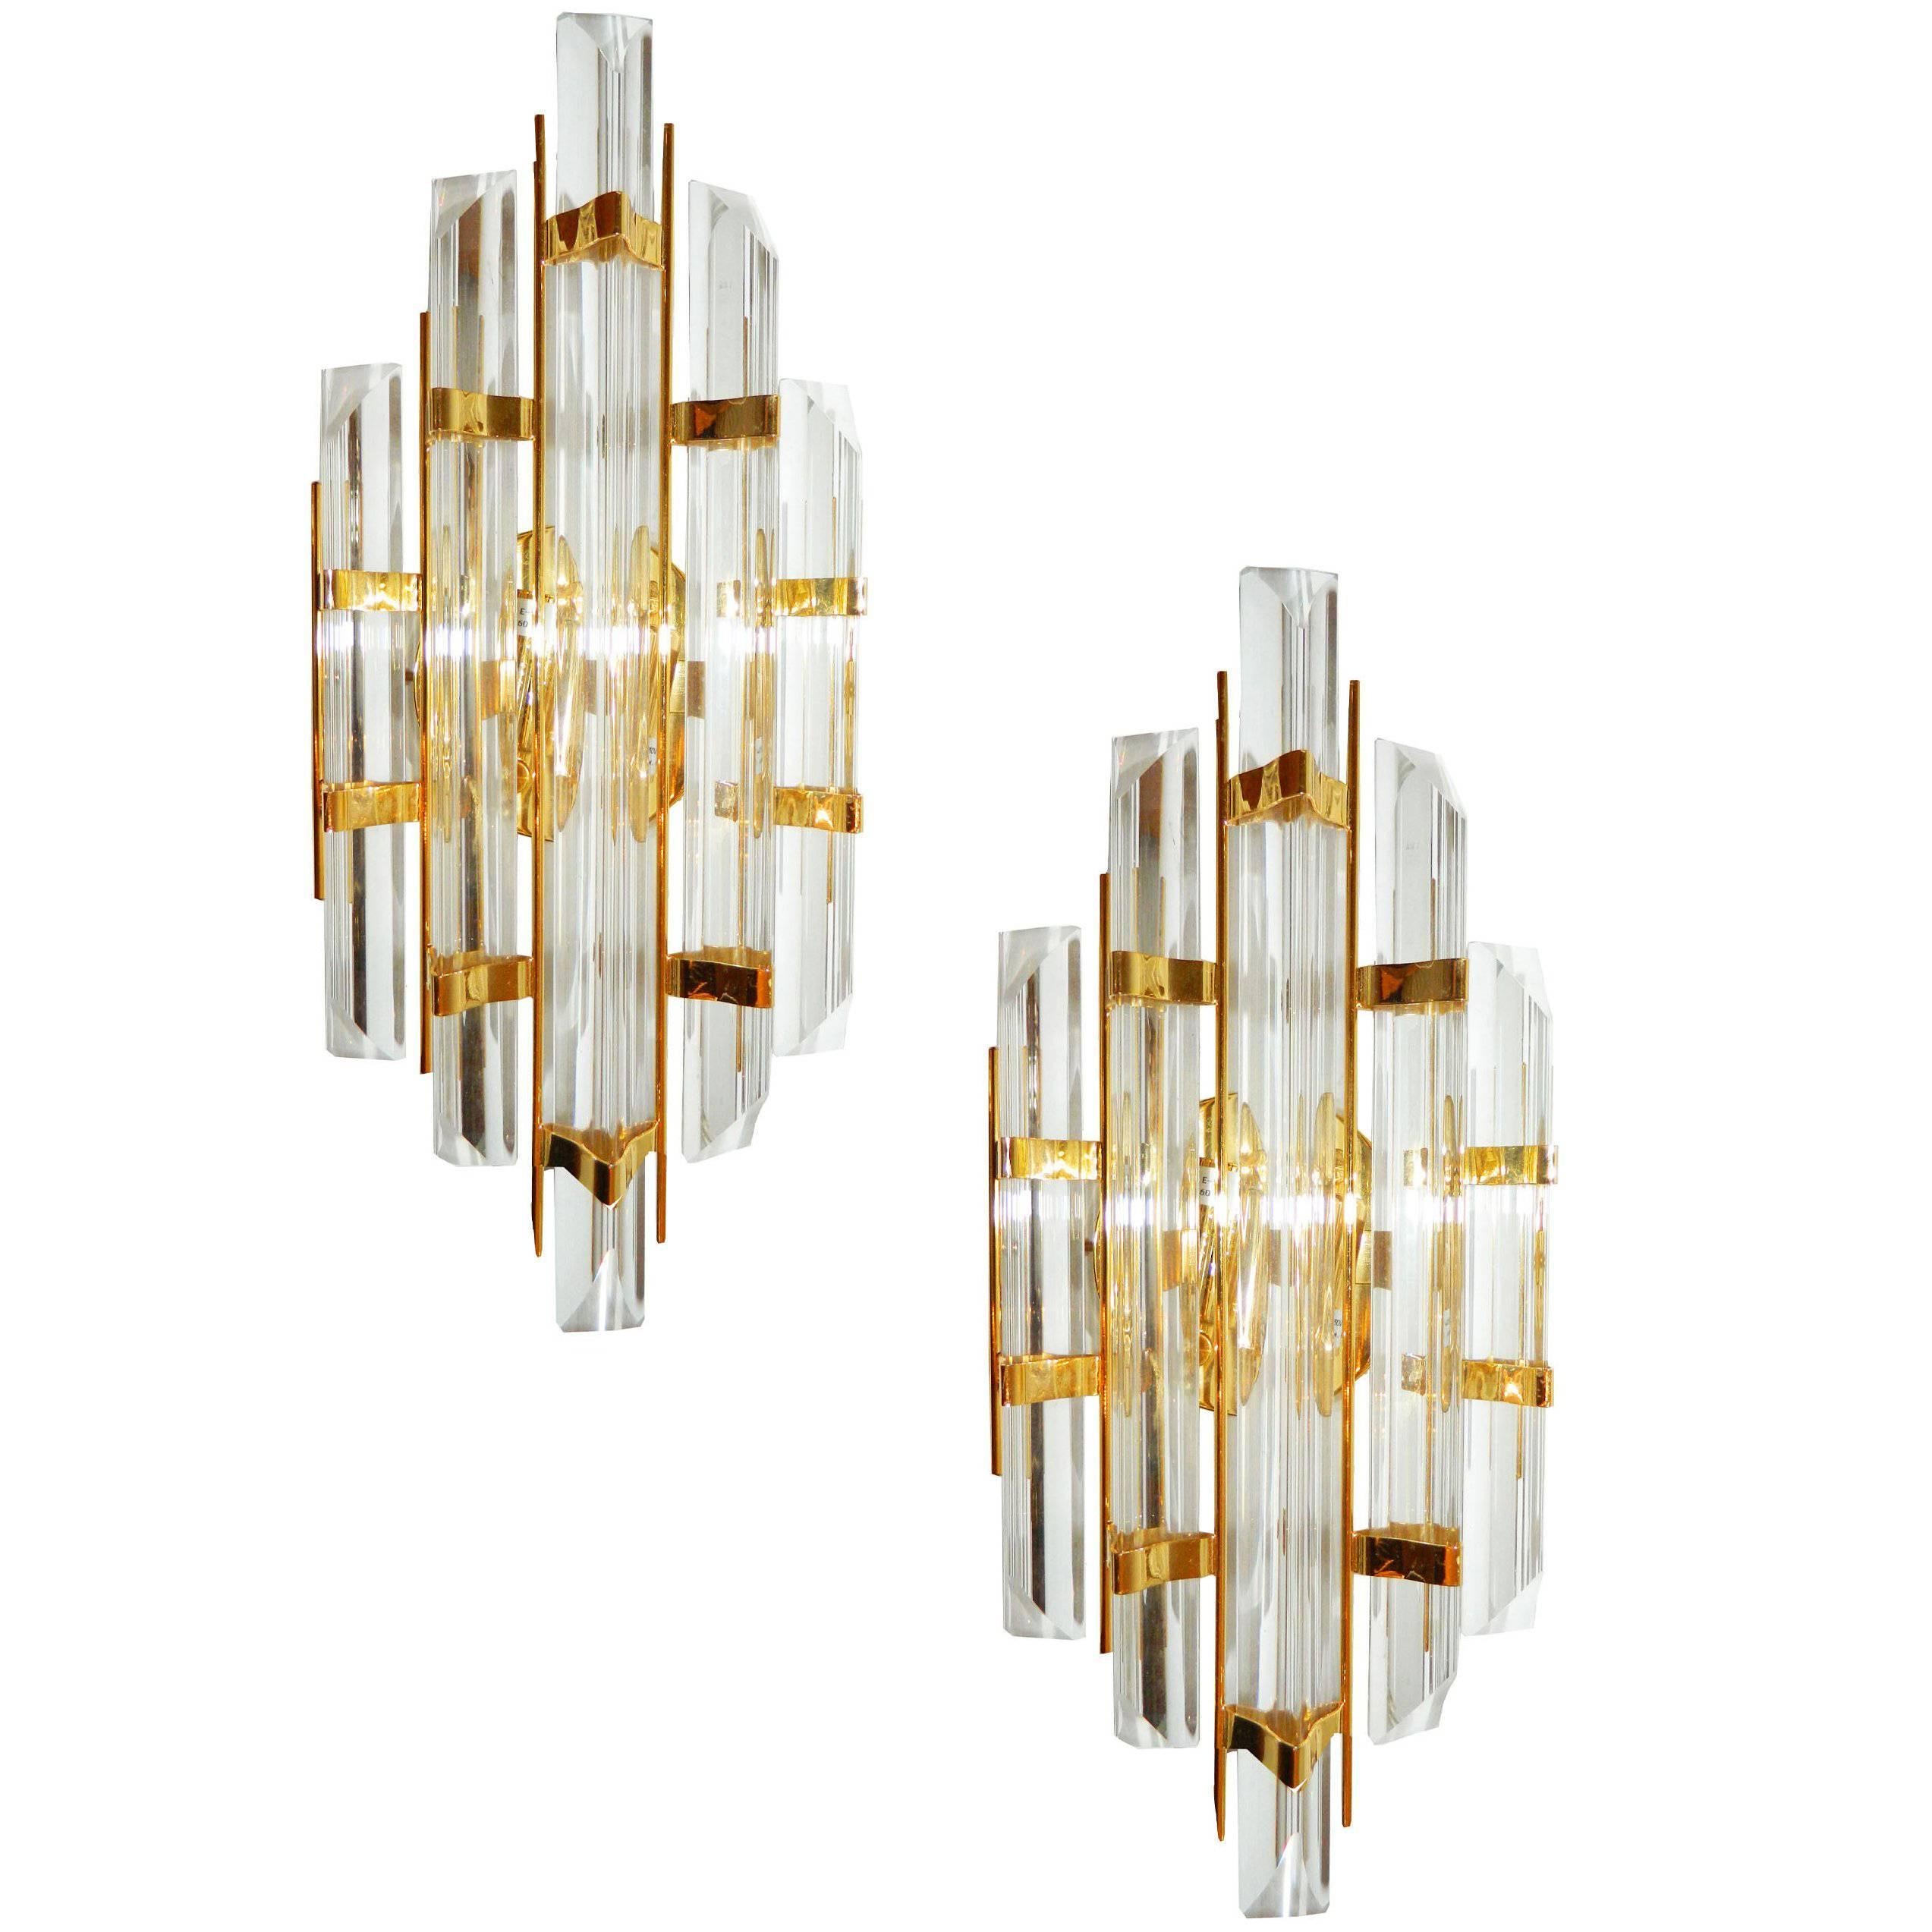 Two Pairs of Murano Glass Sconces, Attributed to Venini, Priced by Pair